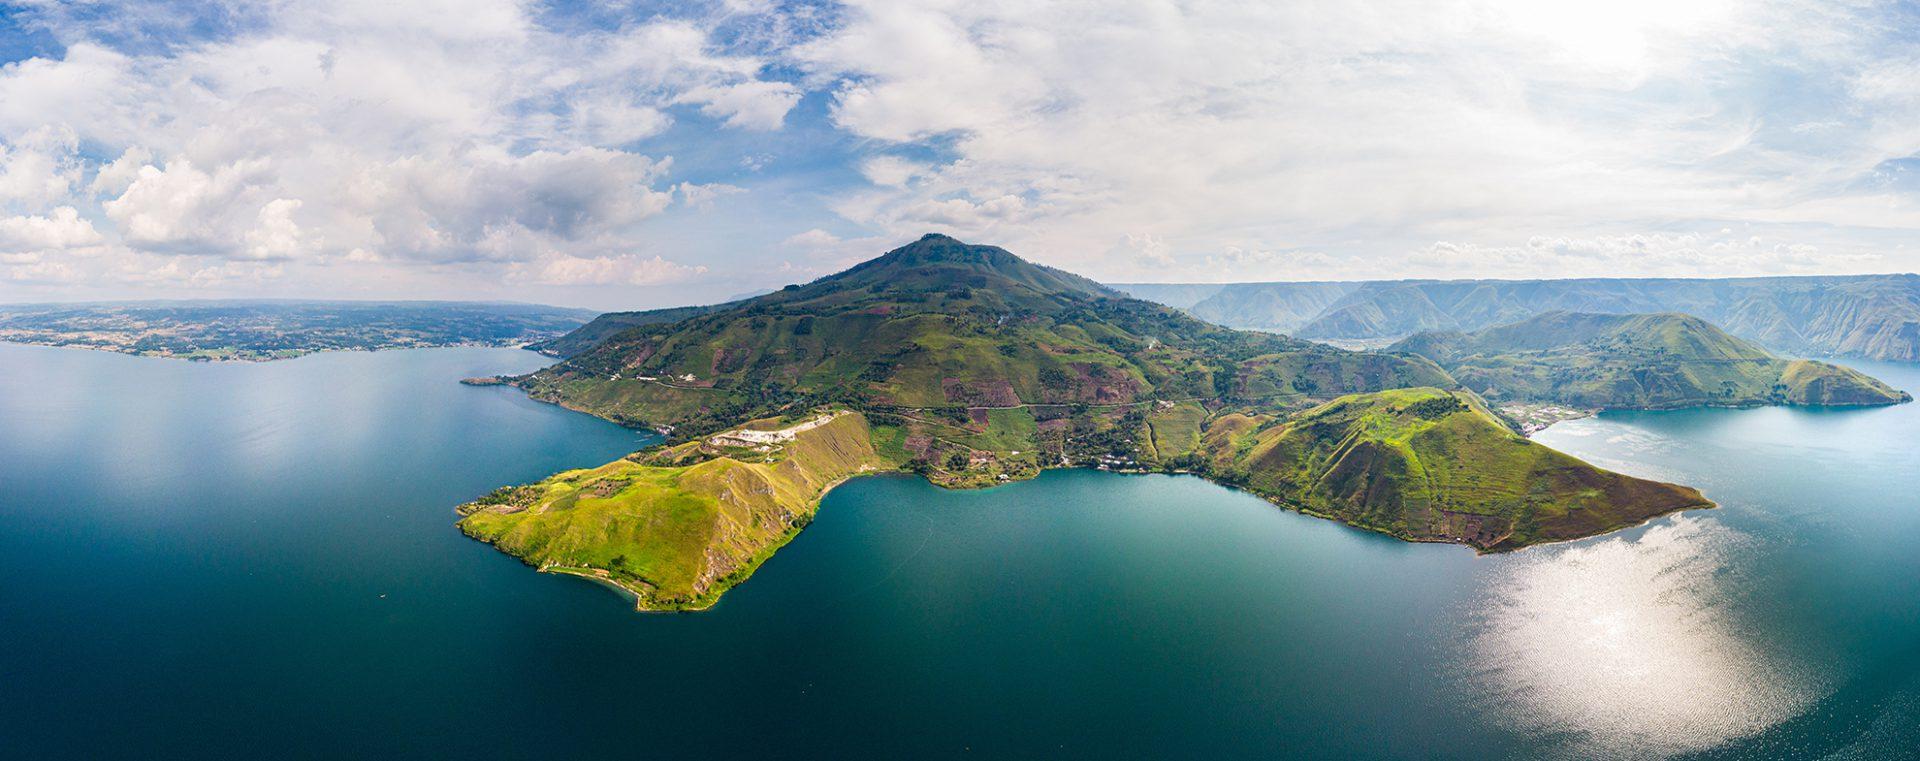 Started farming in Lake Toba, the world’s largest volcanic lake.